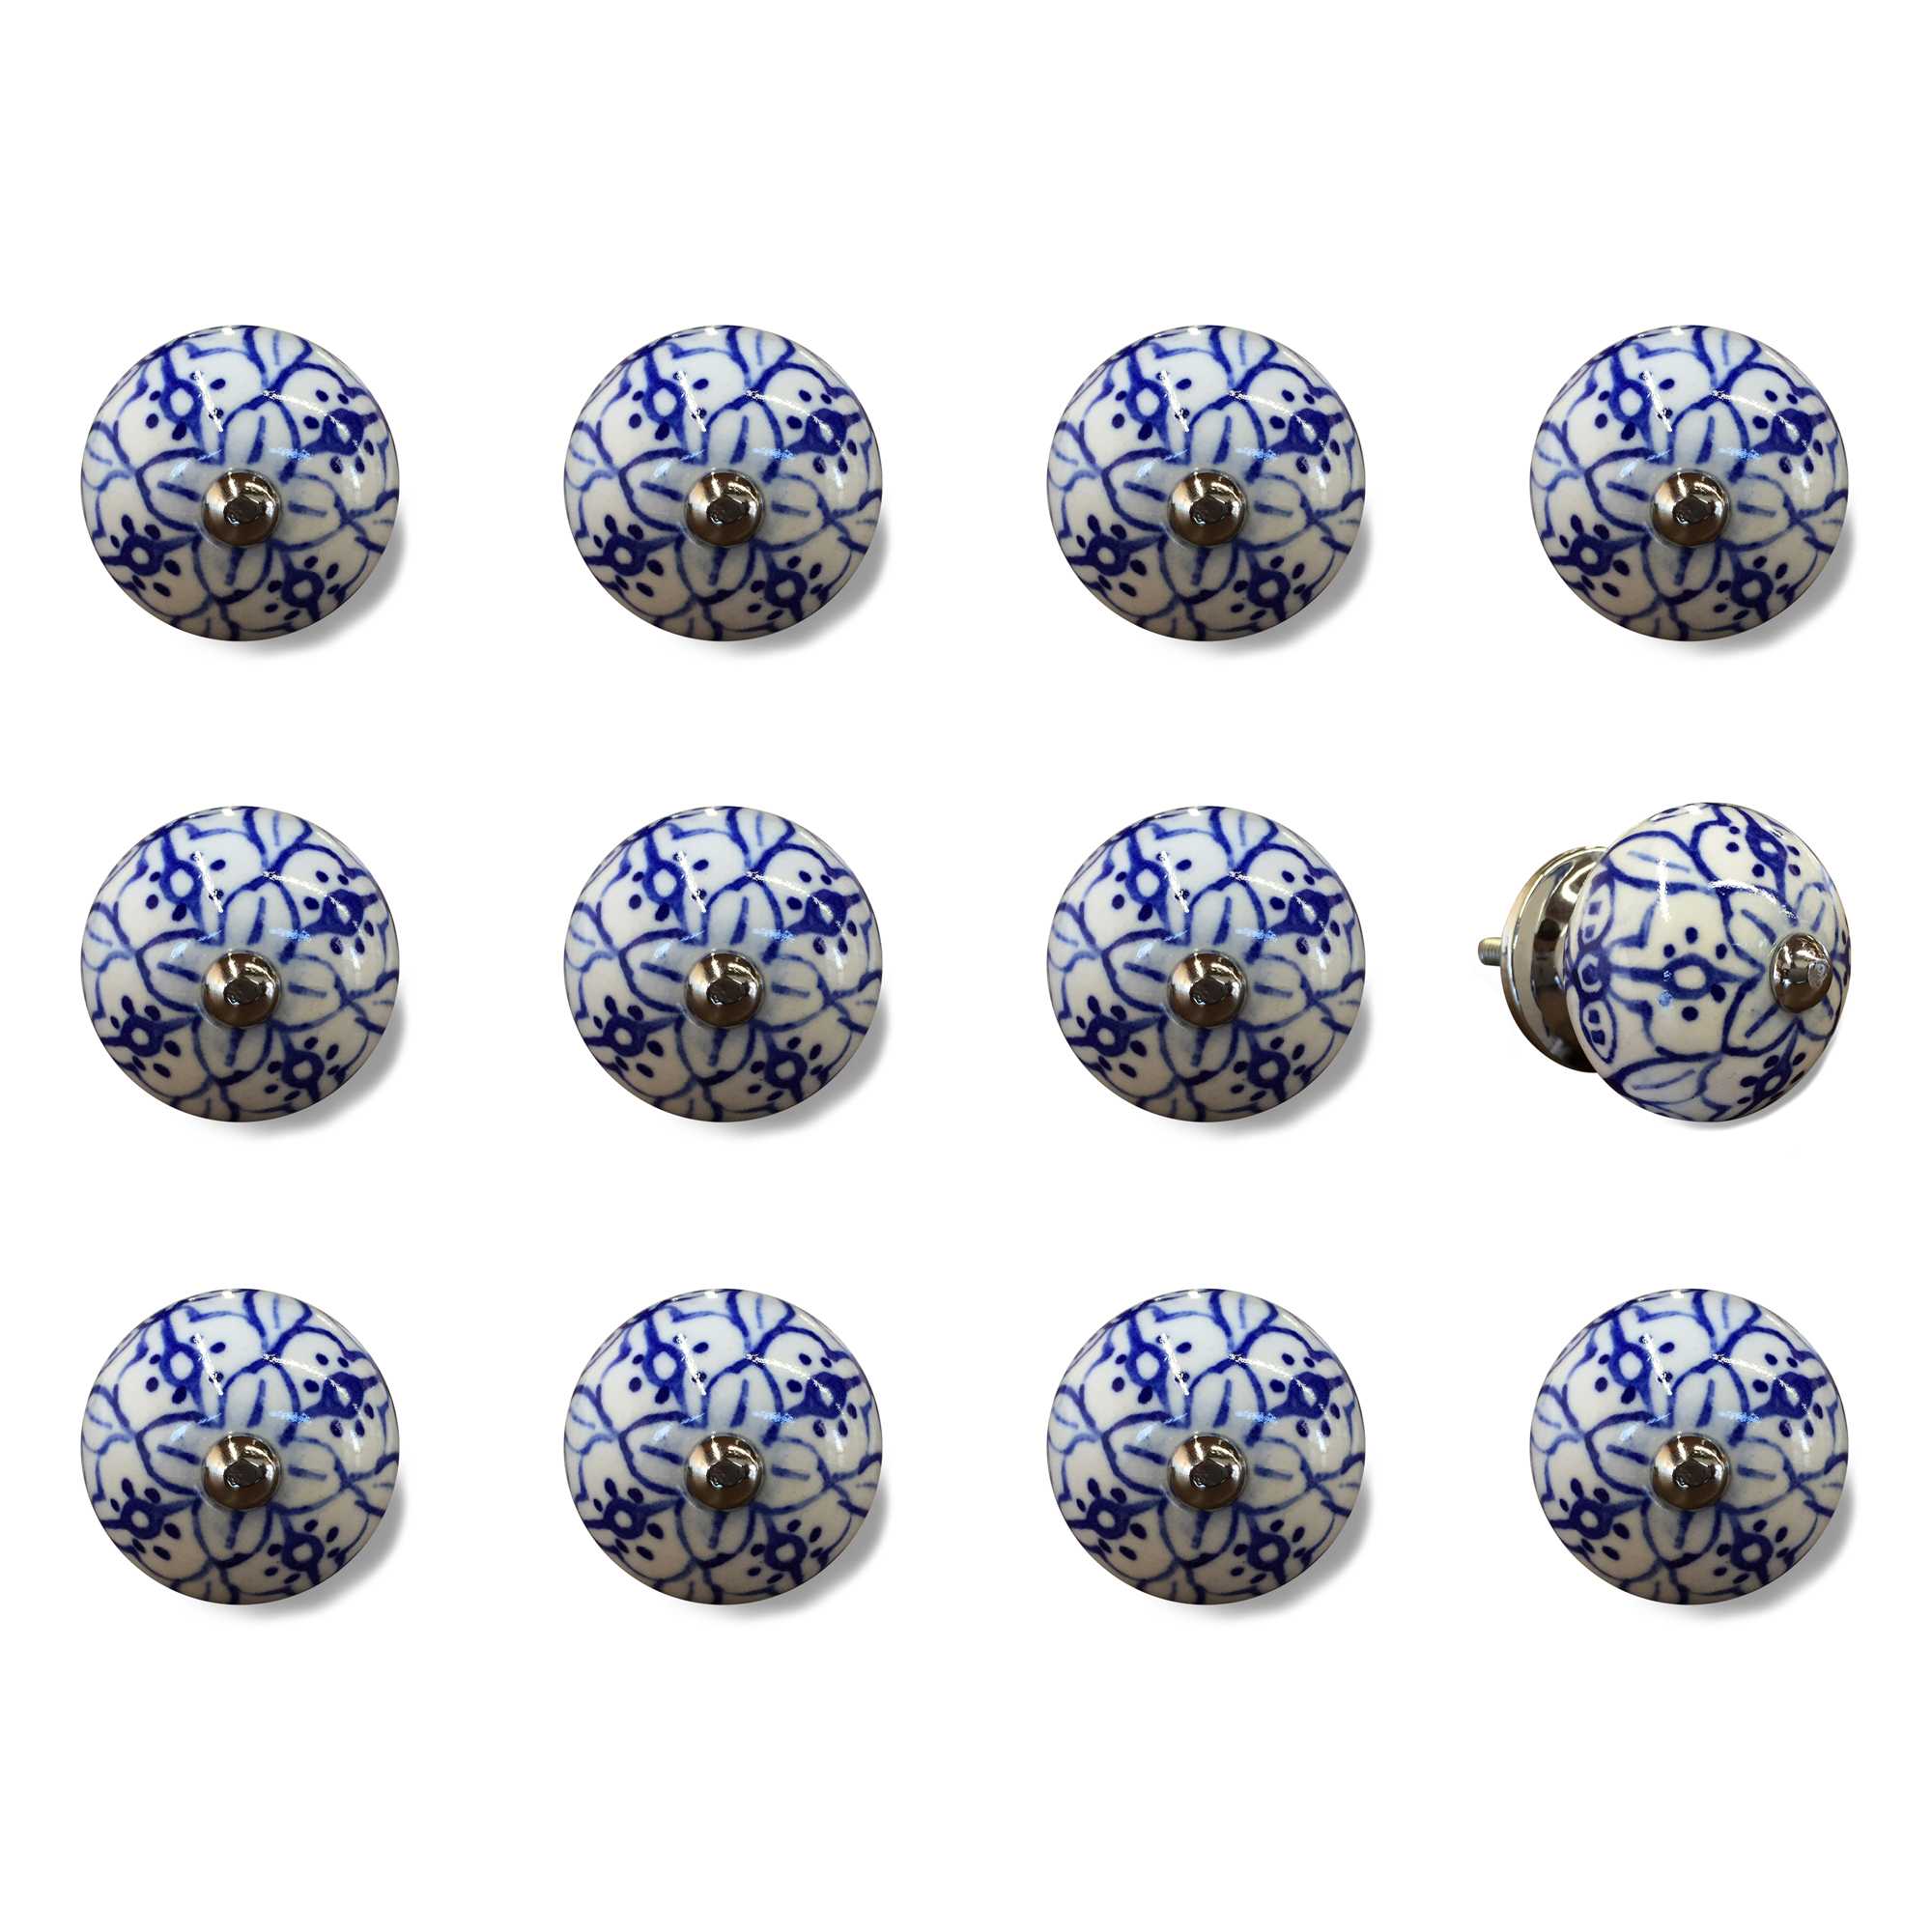 1.5" x 1.5" x 1.5" White, Blue and Silver- Knobs 12-Pack